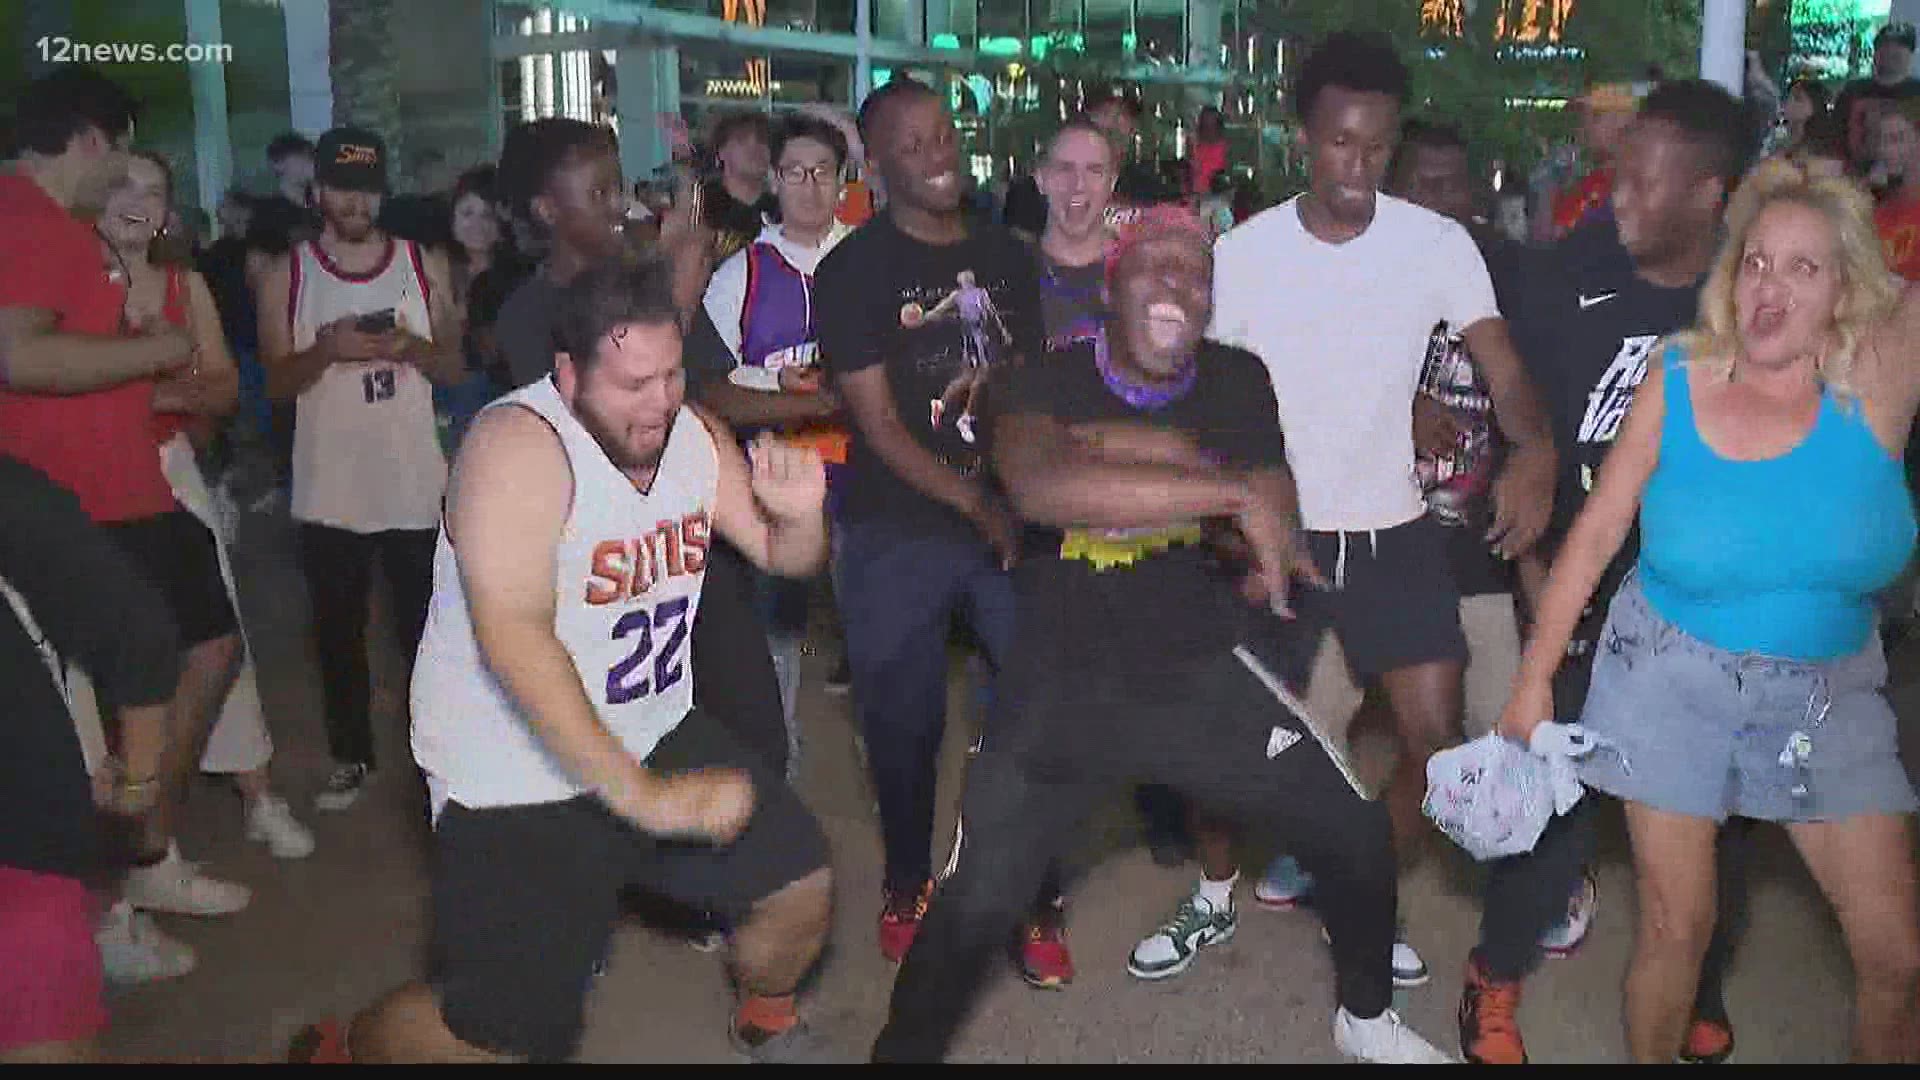 The Phoenix Suns are riding high after a strong win in Game 1 of the NBA Finals, and fans could barely contain their excitement.